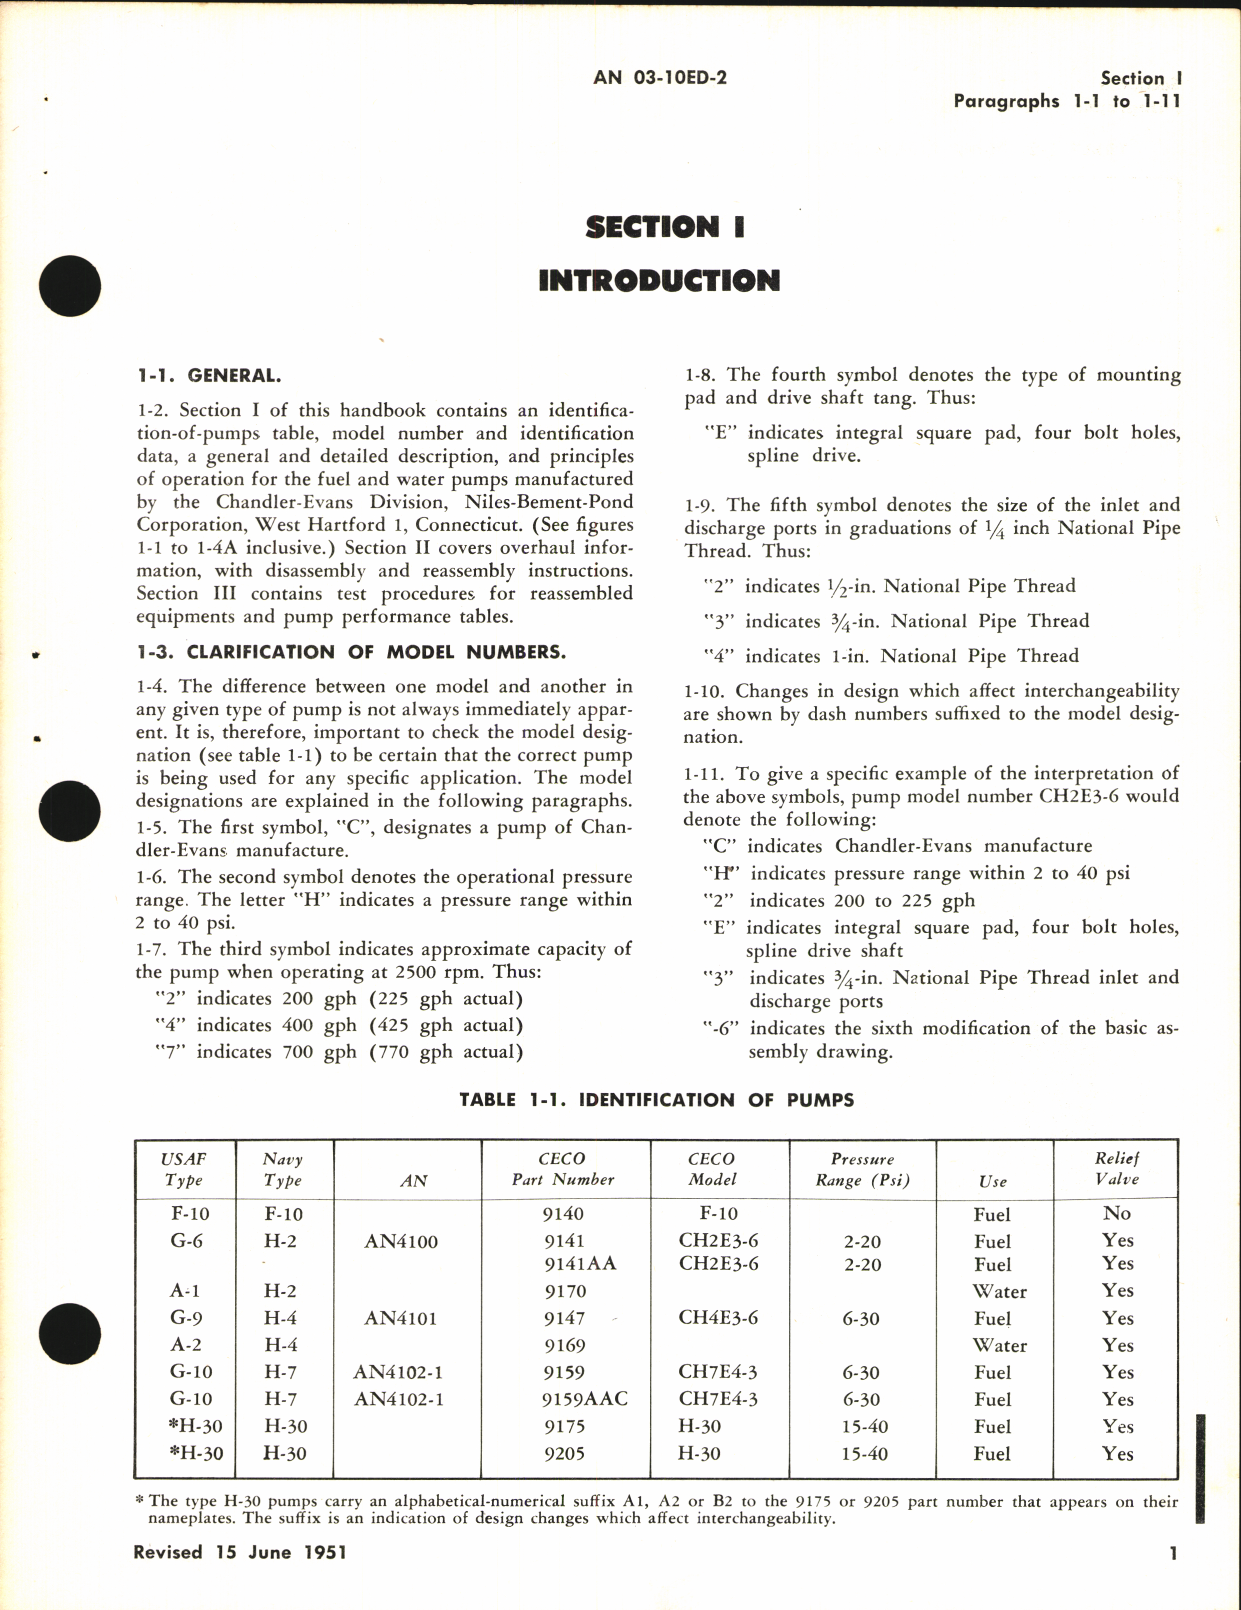 Sample page 7 from AirCorps Library document: Overhaul Instructions for Fuel and Water Pumps